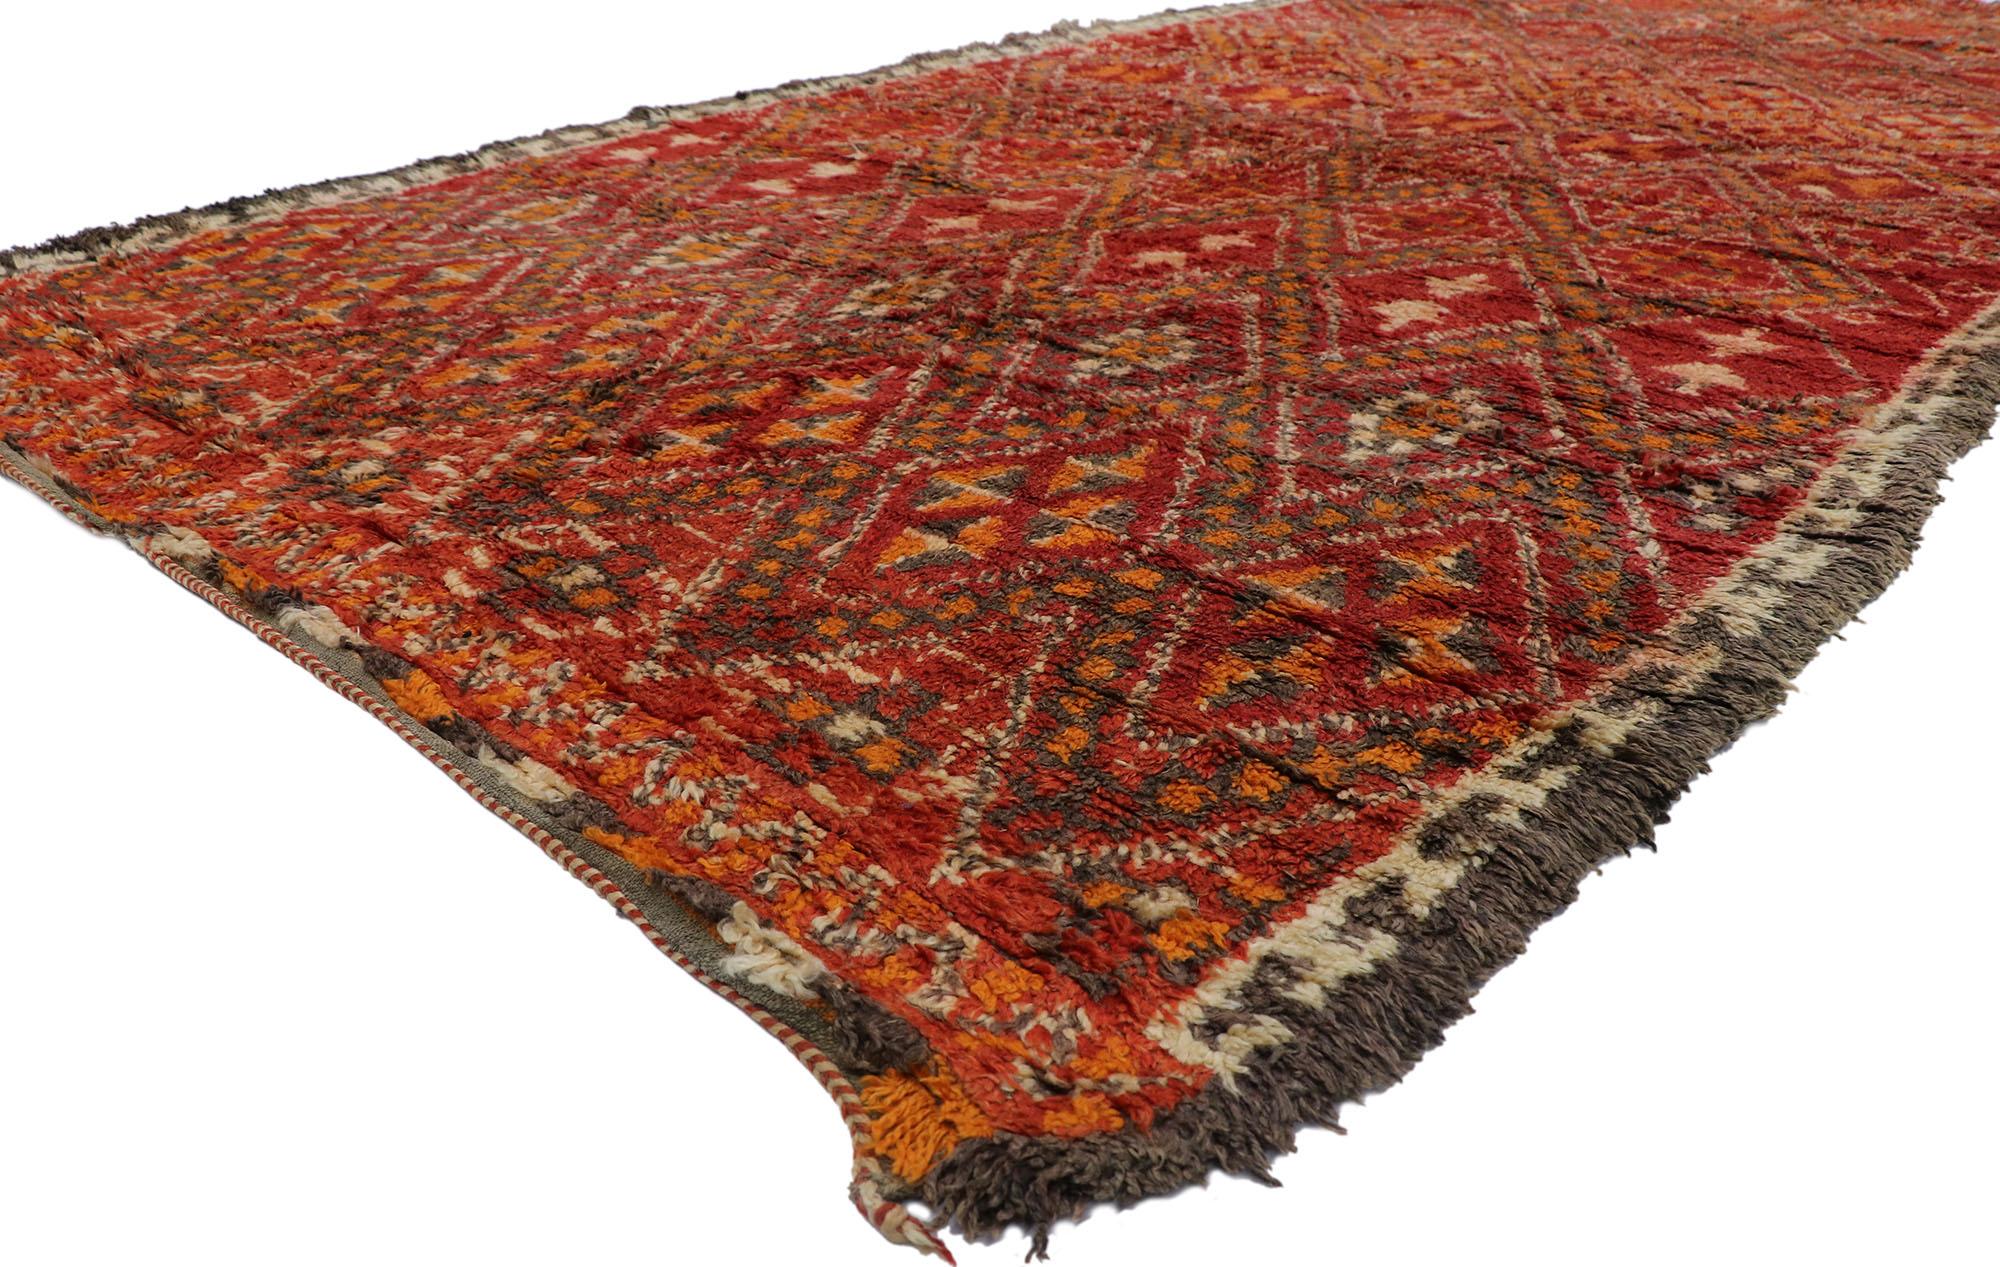 21228 Vintage Berber Beni M'Guild Red Moroccan Rug with Tribal Style 07'03 x 15'04. Showcasing a bold expressive design, incredible detail and texture, this hand knotted wool vintage Berber Beni M'Guild Moroccan rug is a captivating vision of woven